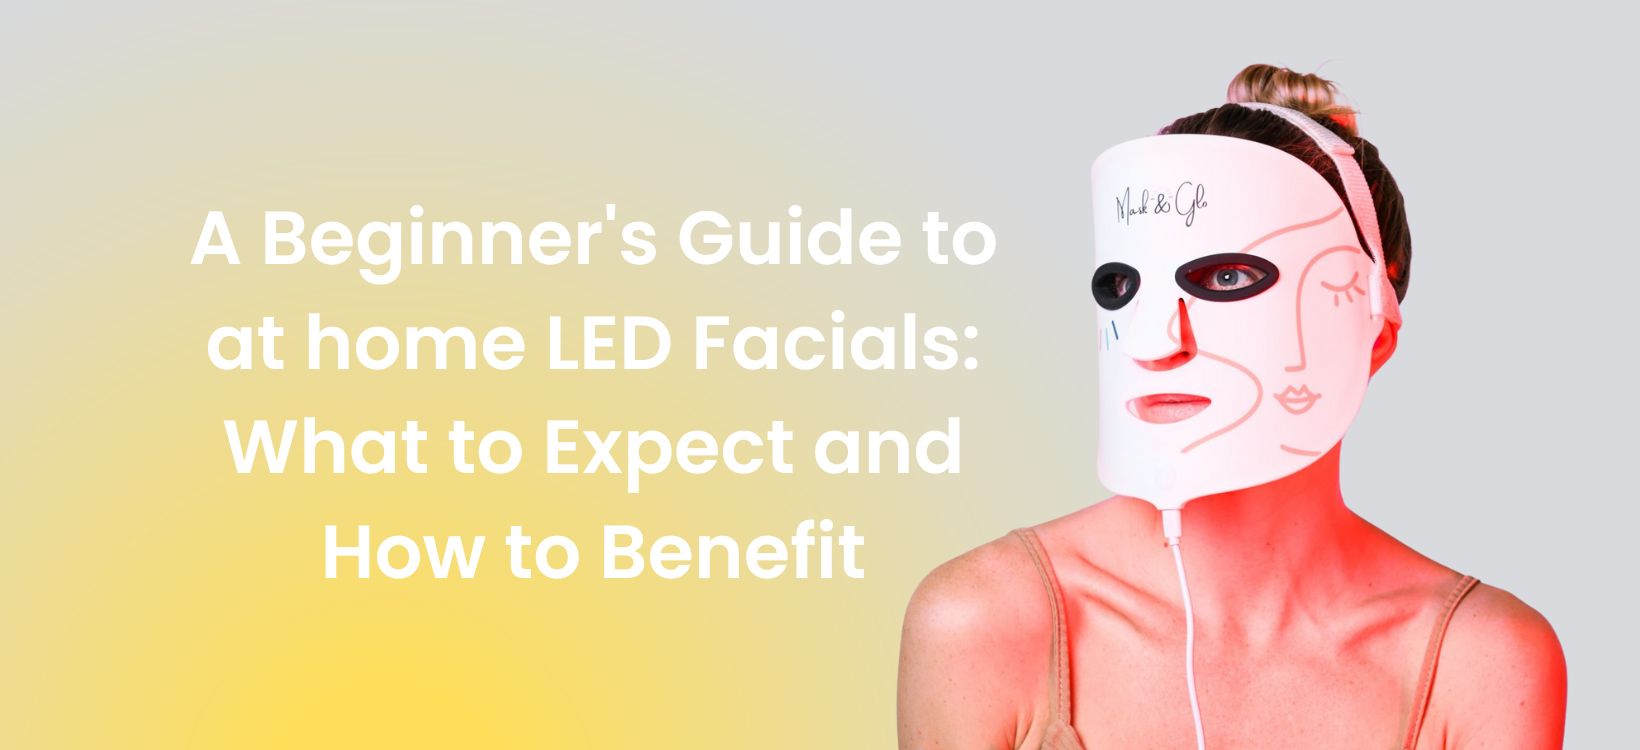 A Beginner's Guide to at home LED Facials: What to Expect and How to Benefit